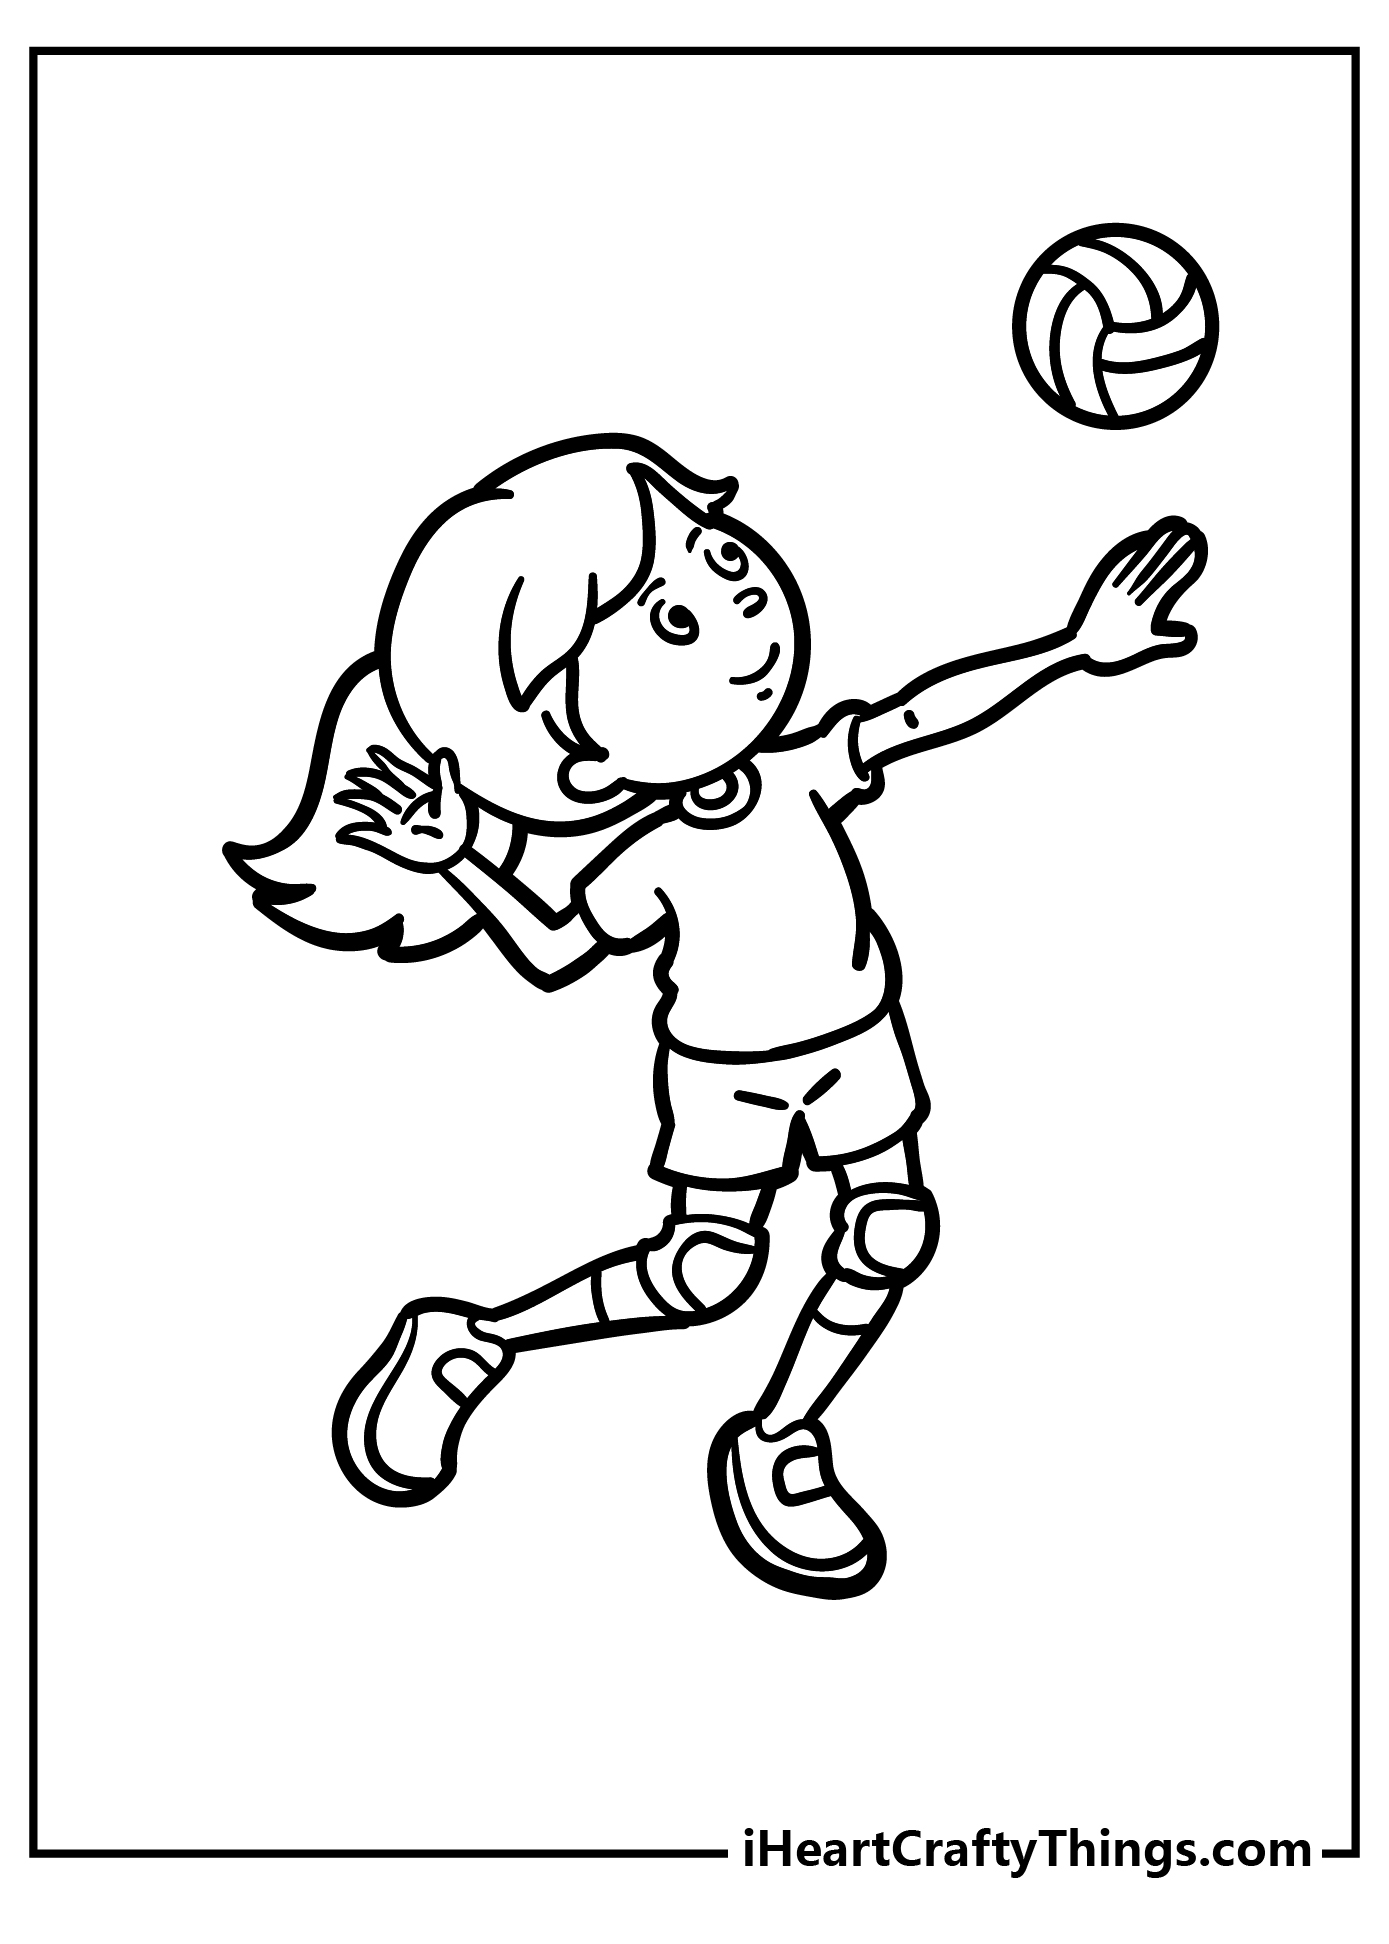 Volleyball coloring pages free printables